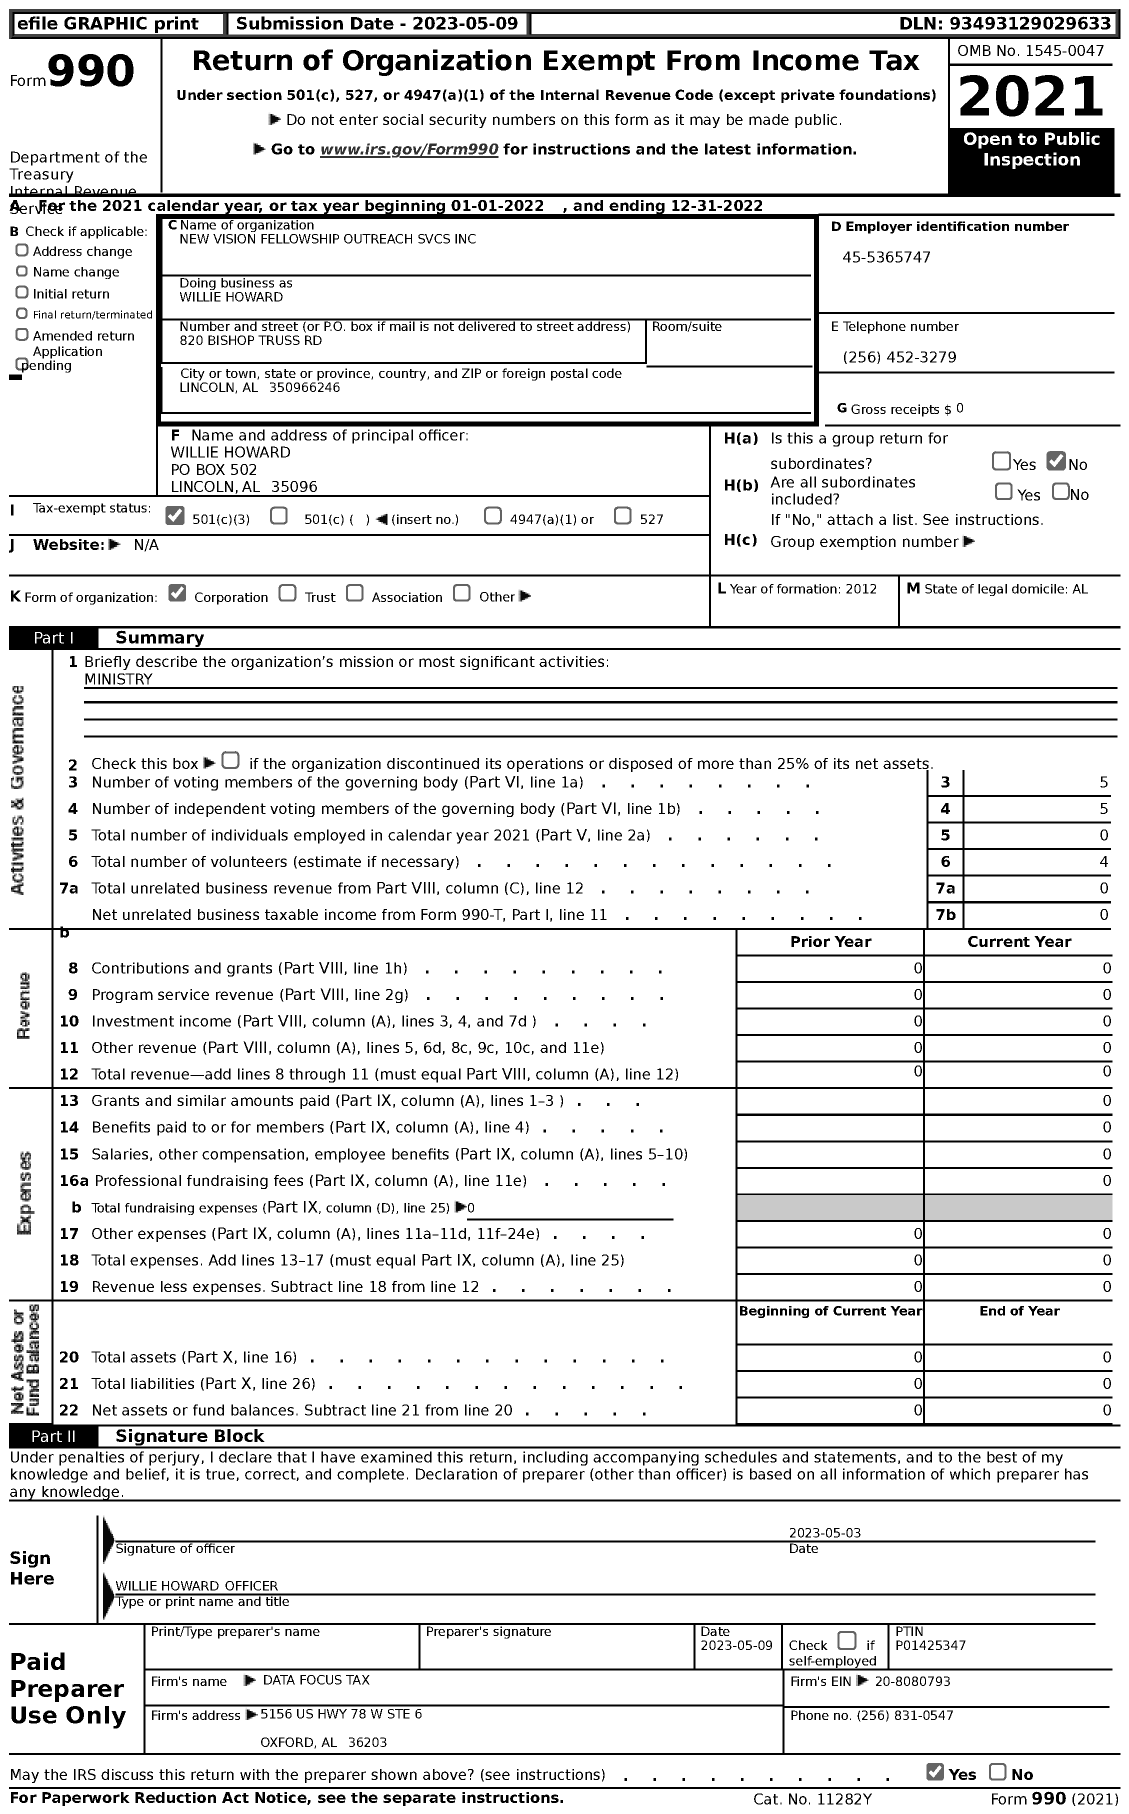 Image of first page of 2022 Form 990 for New Vision Fellowship Outreach SVCS